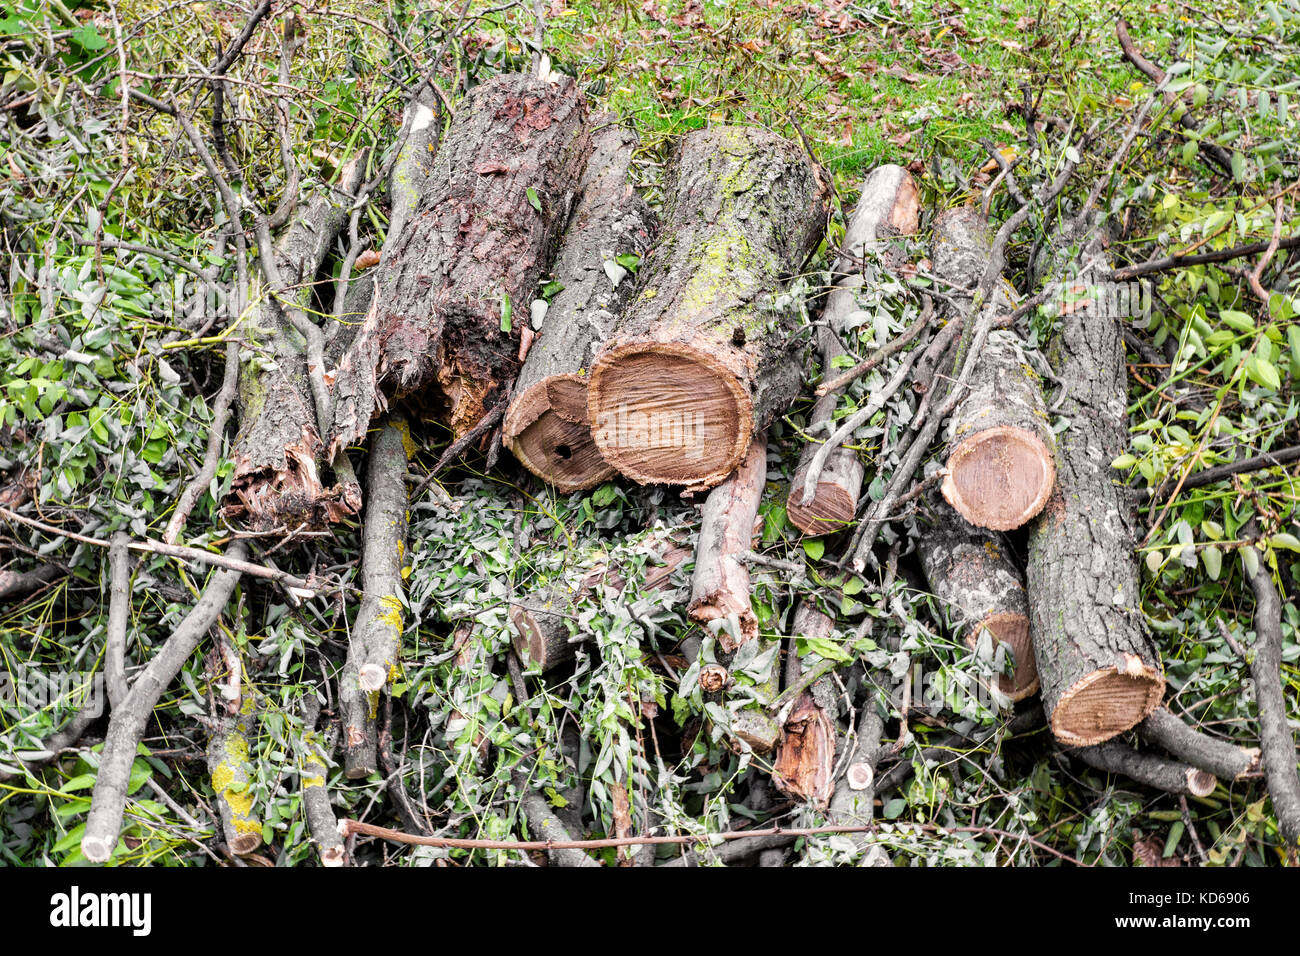 fuel wood. Pile of trunks and branches Stock Photo